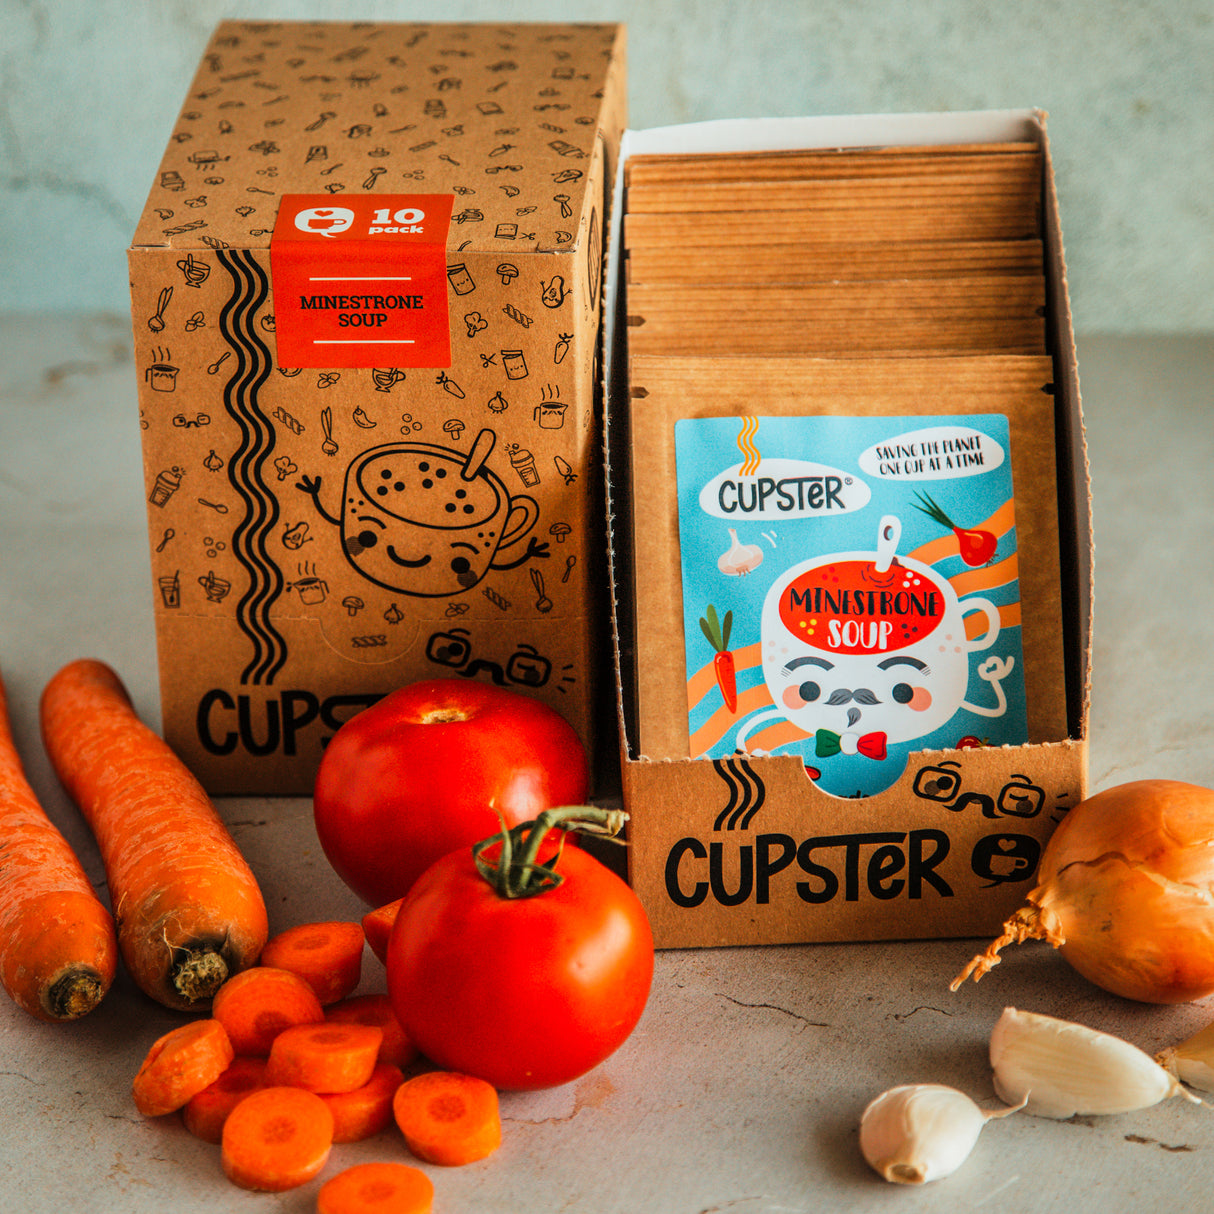 Cupster Instant-Minestrone-Suppe 22g